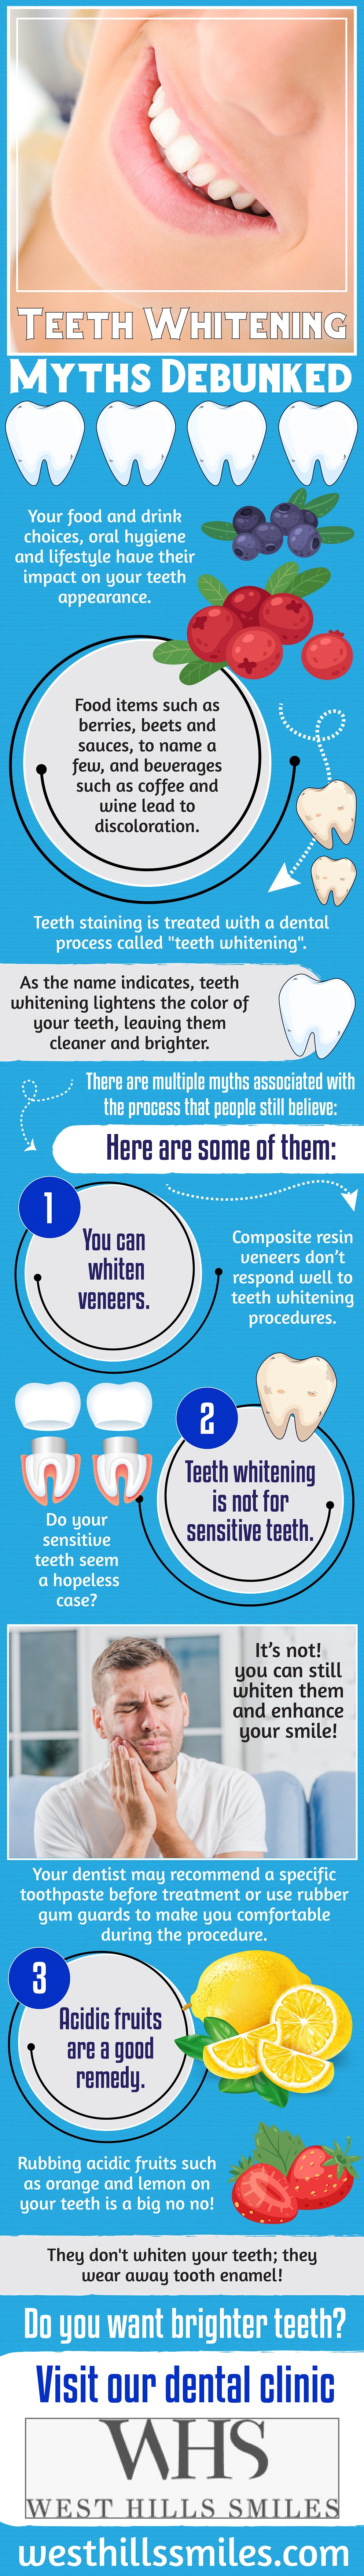 infographic on Teeth whitening myths 